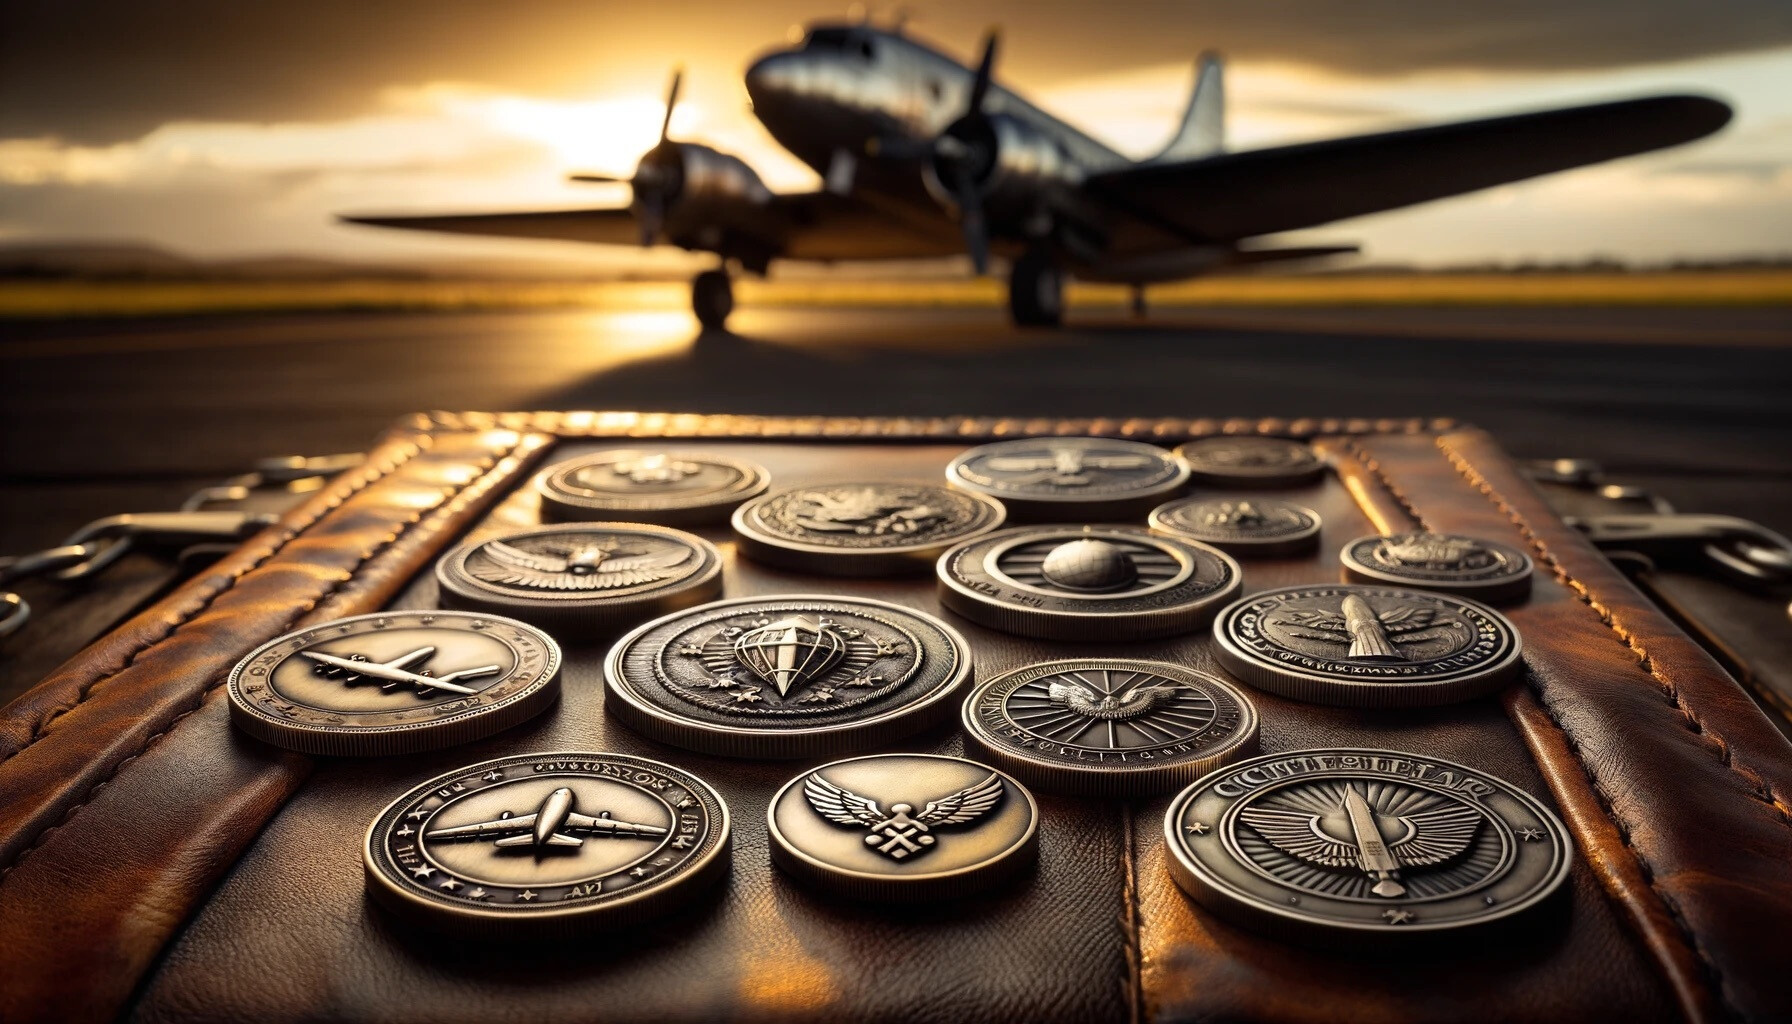 Aviation Challenge Coins: The Wings of Commemoration